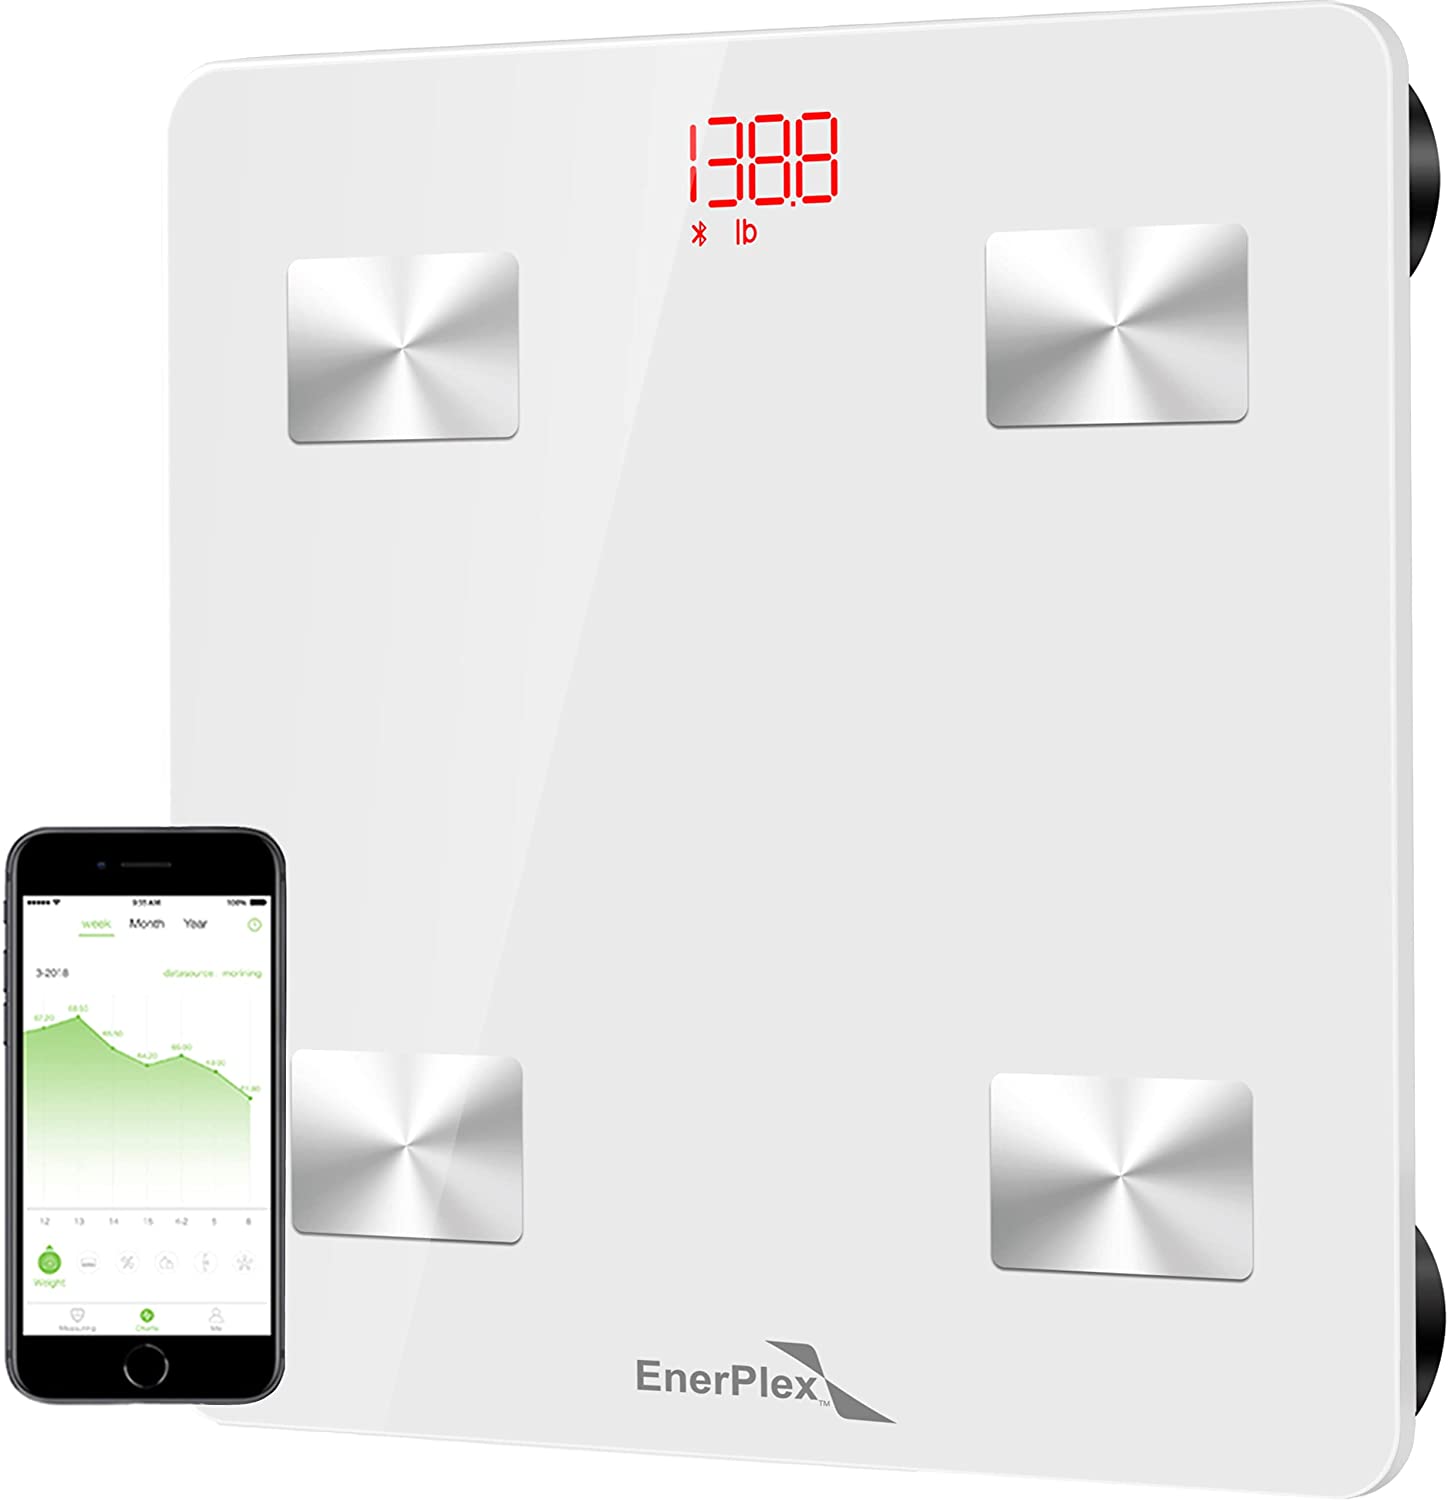 EnerPlex BMI Digital Weight Scale w/ Smartphone Bluetooth Fitness App Sync (white) $12.38 + Free Shipping w/ Prime or on $25+